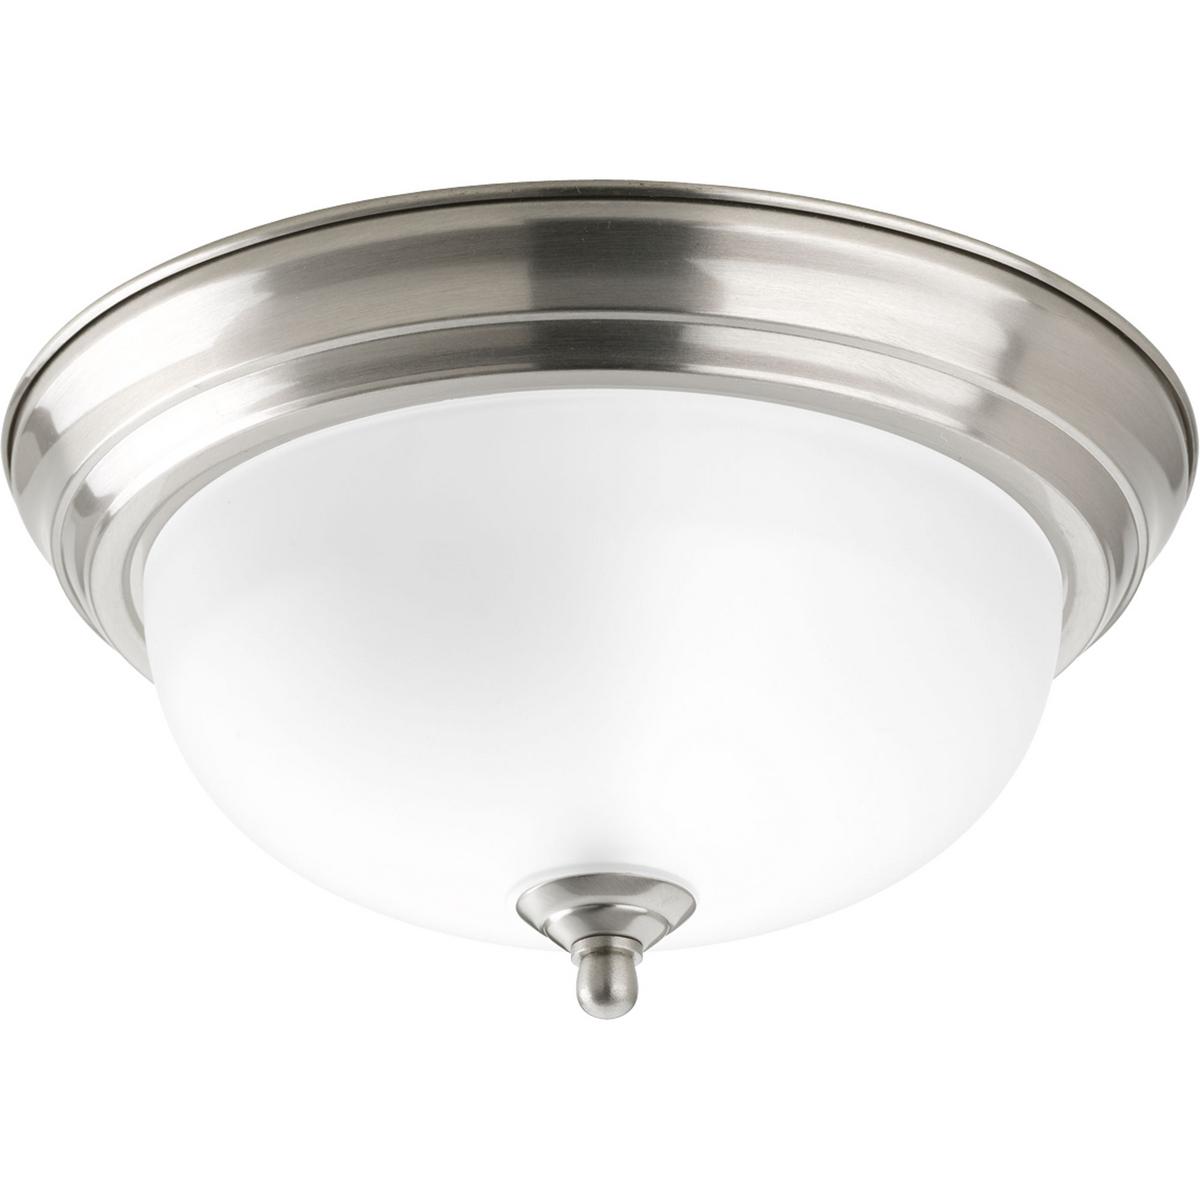 Hubbell P3924-09ET One-light 11" flush mount with dome shaped etched glass, solid trim and decorative knobs. Center lock-up with matching finial. Brushed Nickel finish.  ; Brushed Nickel finish. ; Alabaster Glass. ; Decorative details.